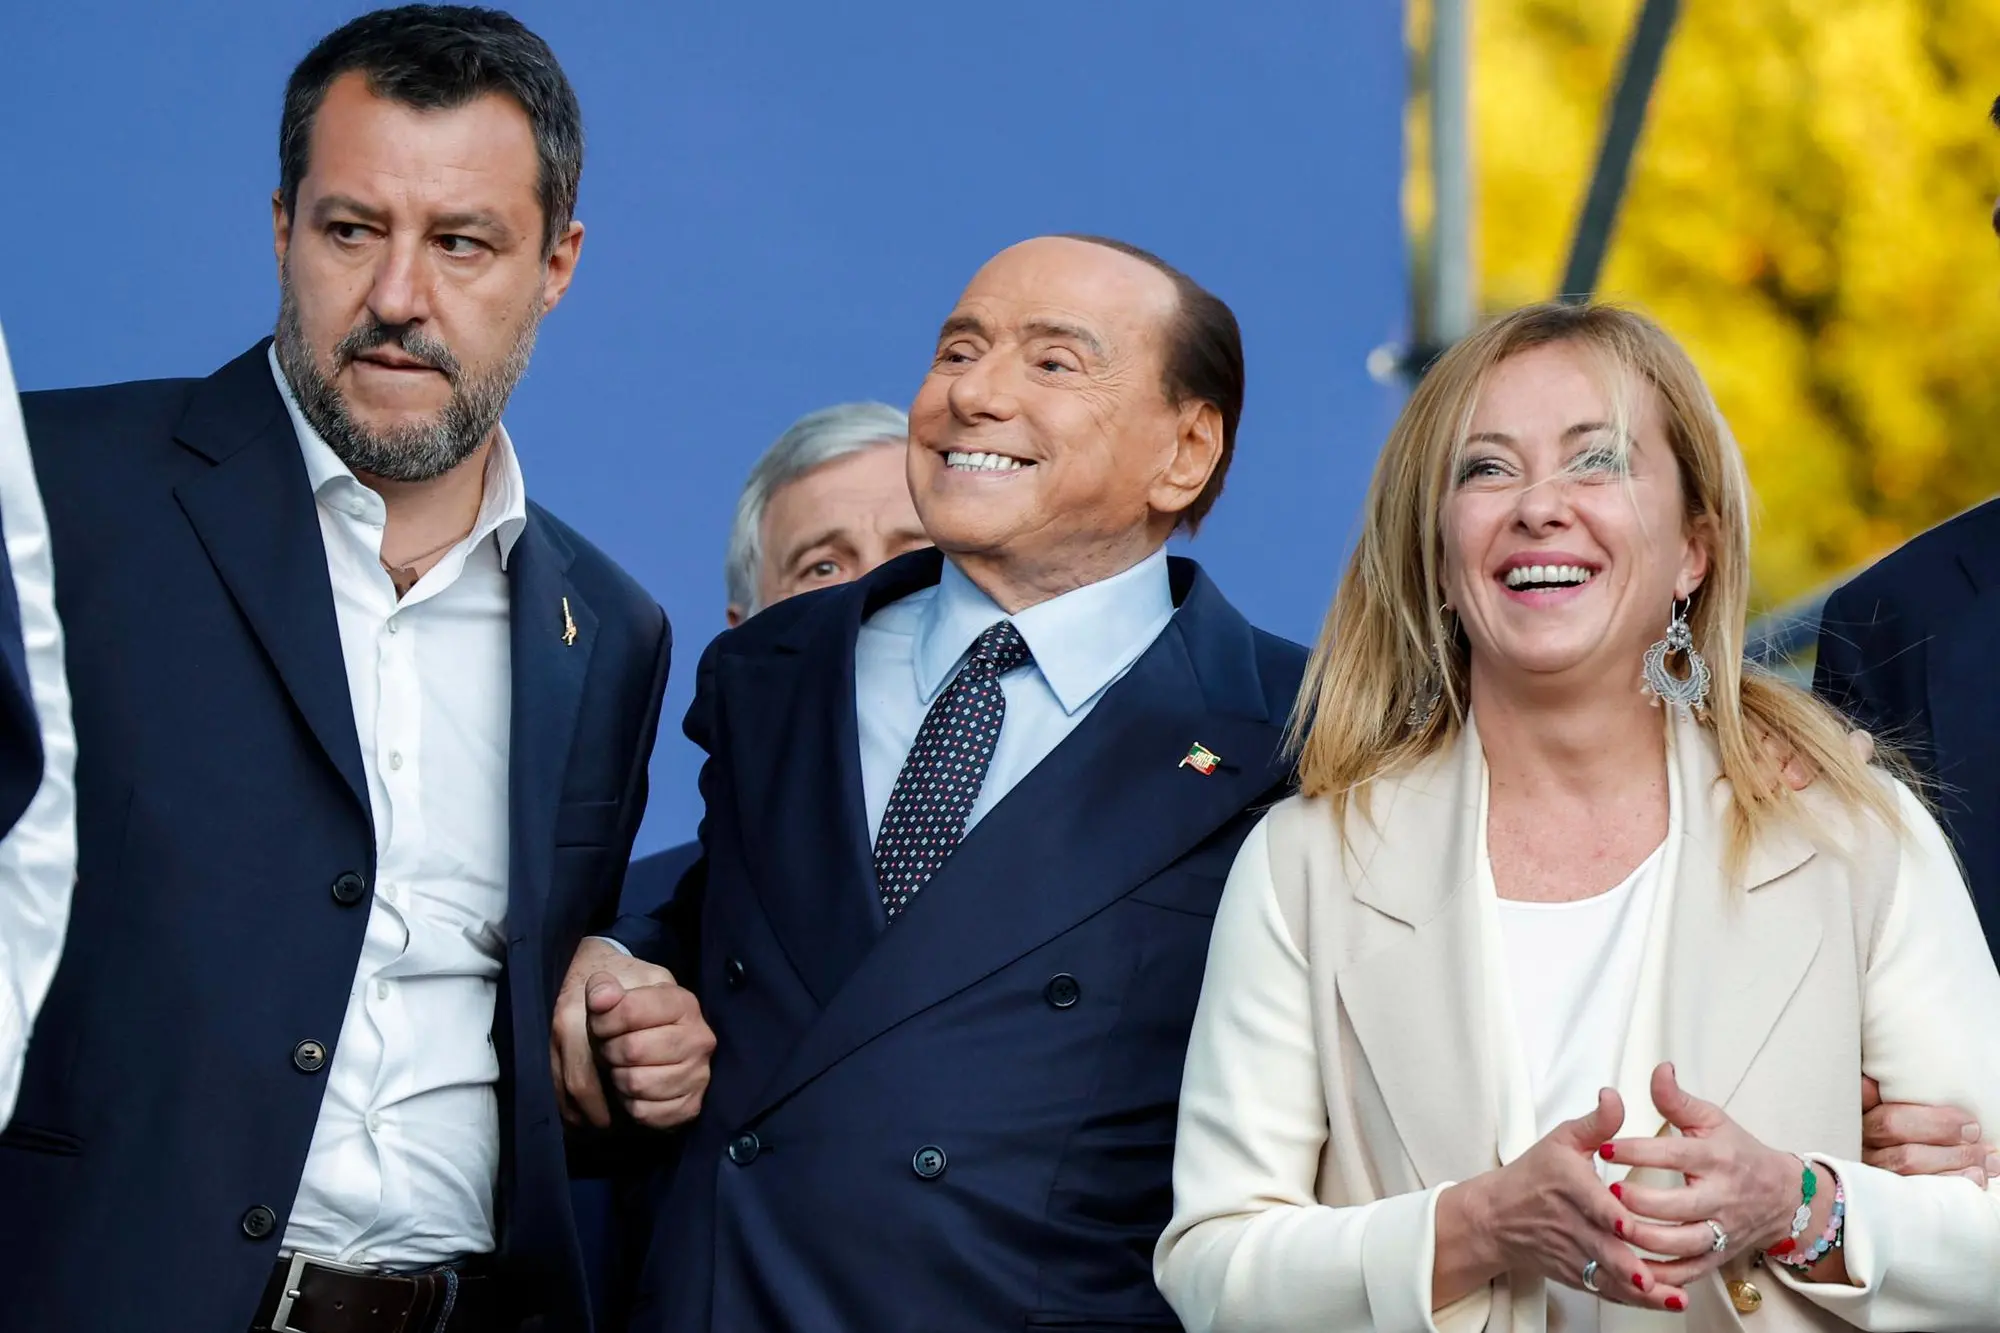 (L-R) Federal secretary of Italian party Lega Nord Matteo Salvini, and president of Italian party 'Forza Italia' Silvio Berlusconi and leader of Italian party Fratelli dÂ?Italia (Brothers of Italy) Giorgia Meloni attend the center-right closing rally of the campaign for the general elections at Piazza del Popolo, in Rome, Italy, 22 September 2022. ANSA/GIUSEPPE LAMI